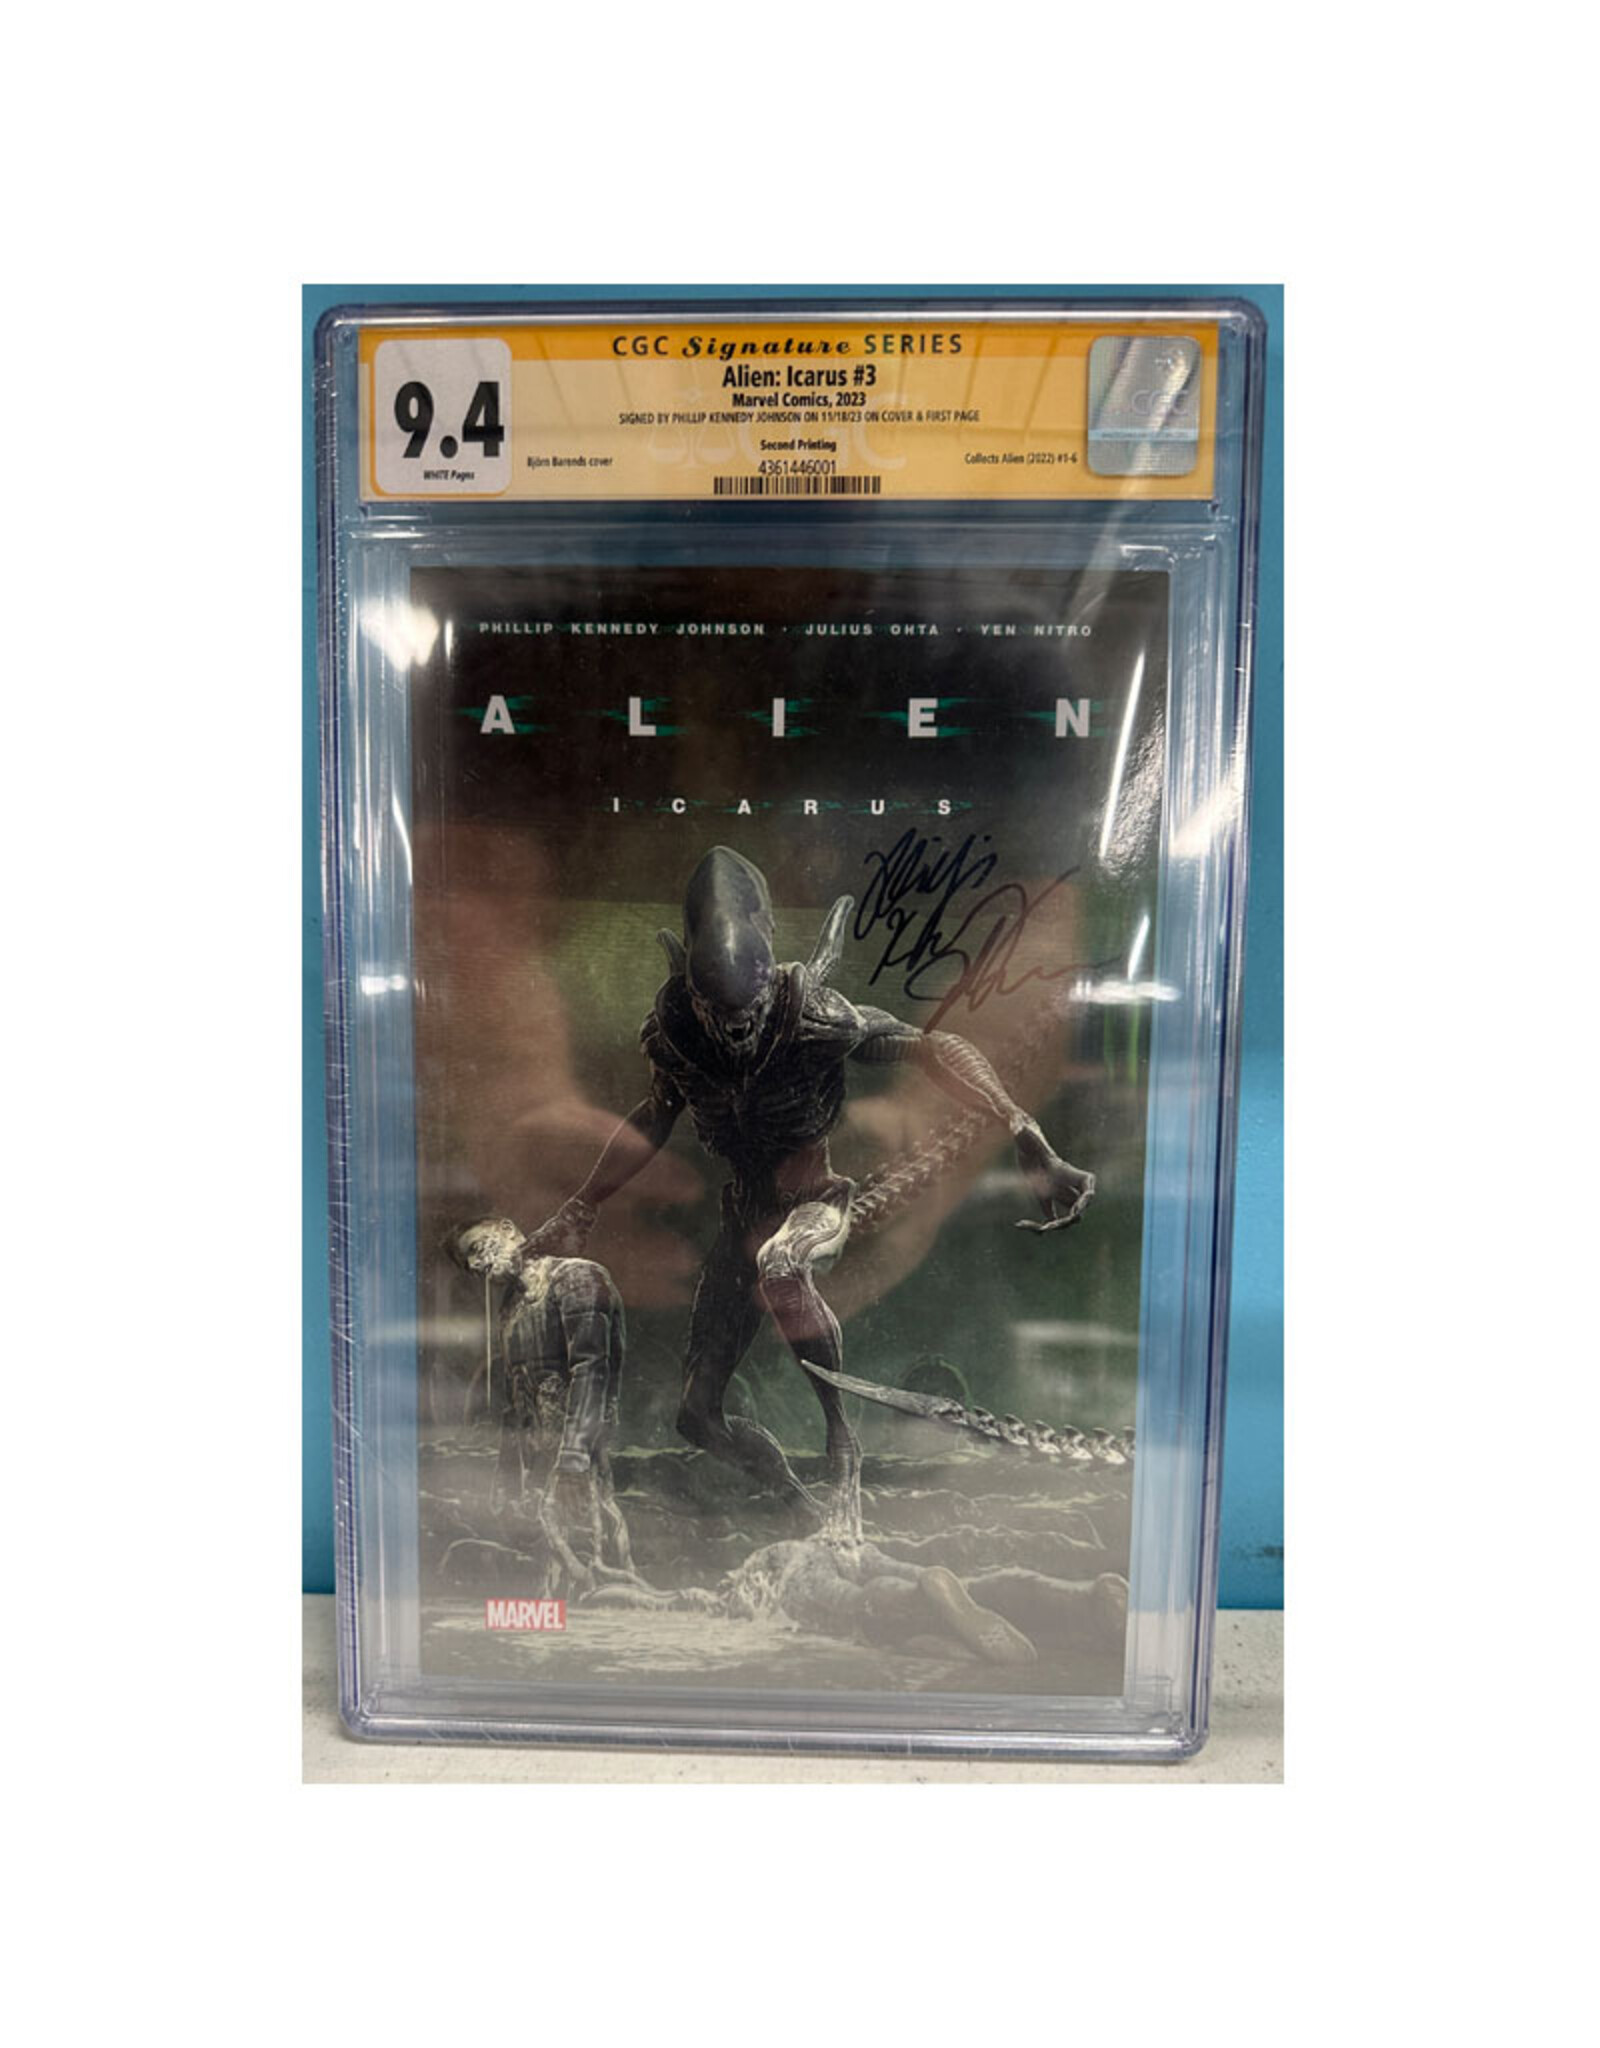 Image Comics Alien: Icarus #3 CGC Graded 9.4 signed by Phillip Kennedy Johnson